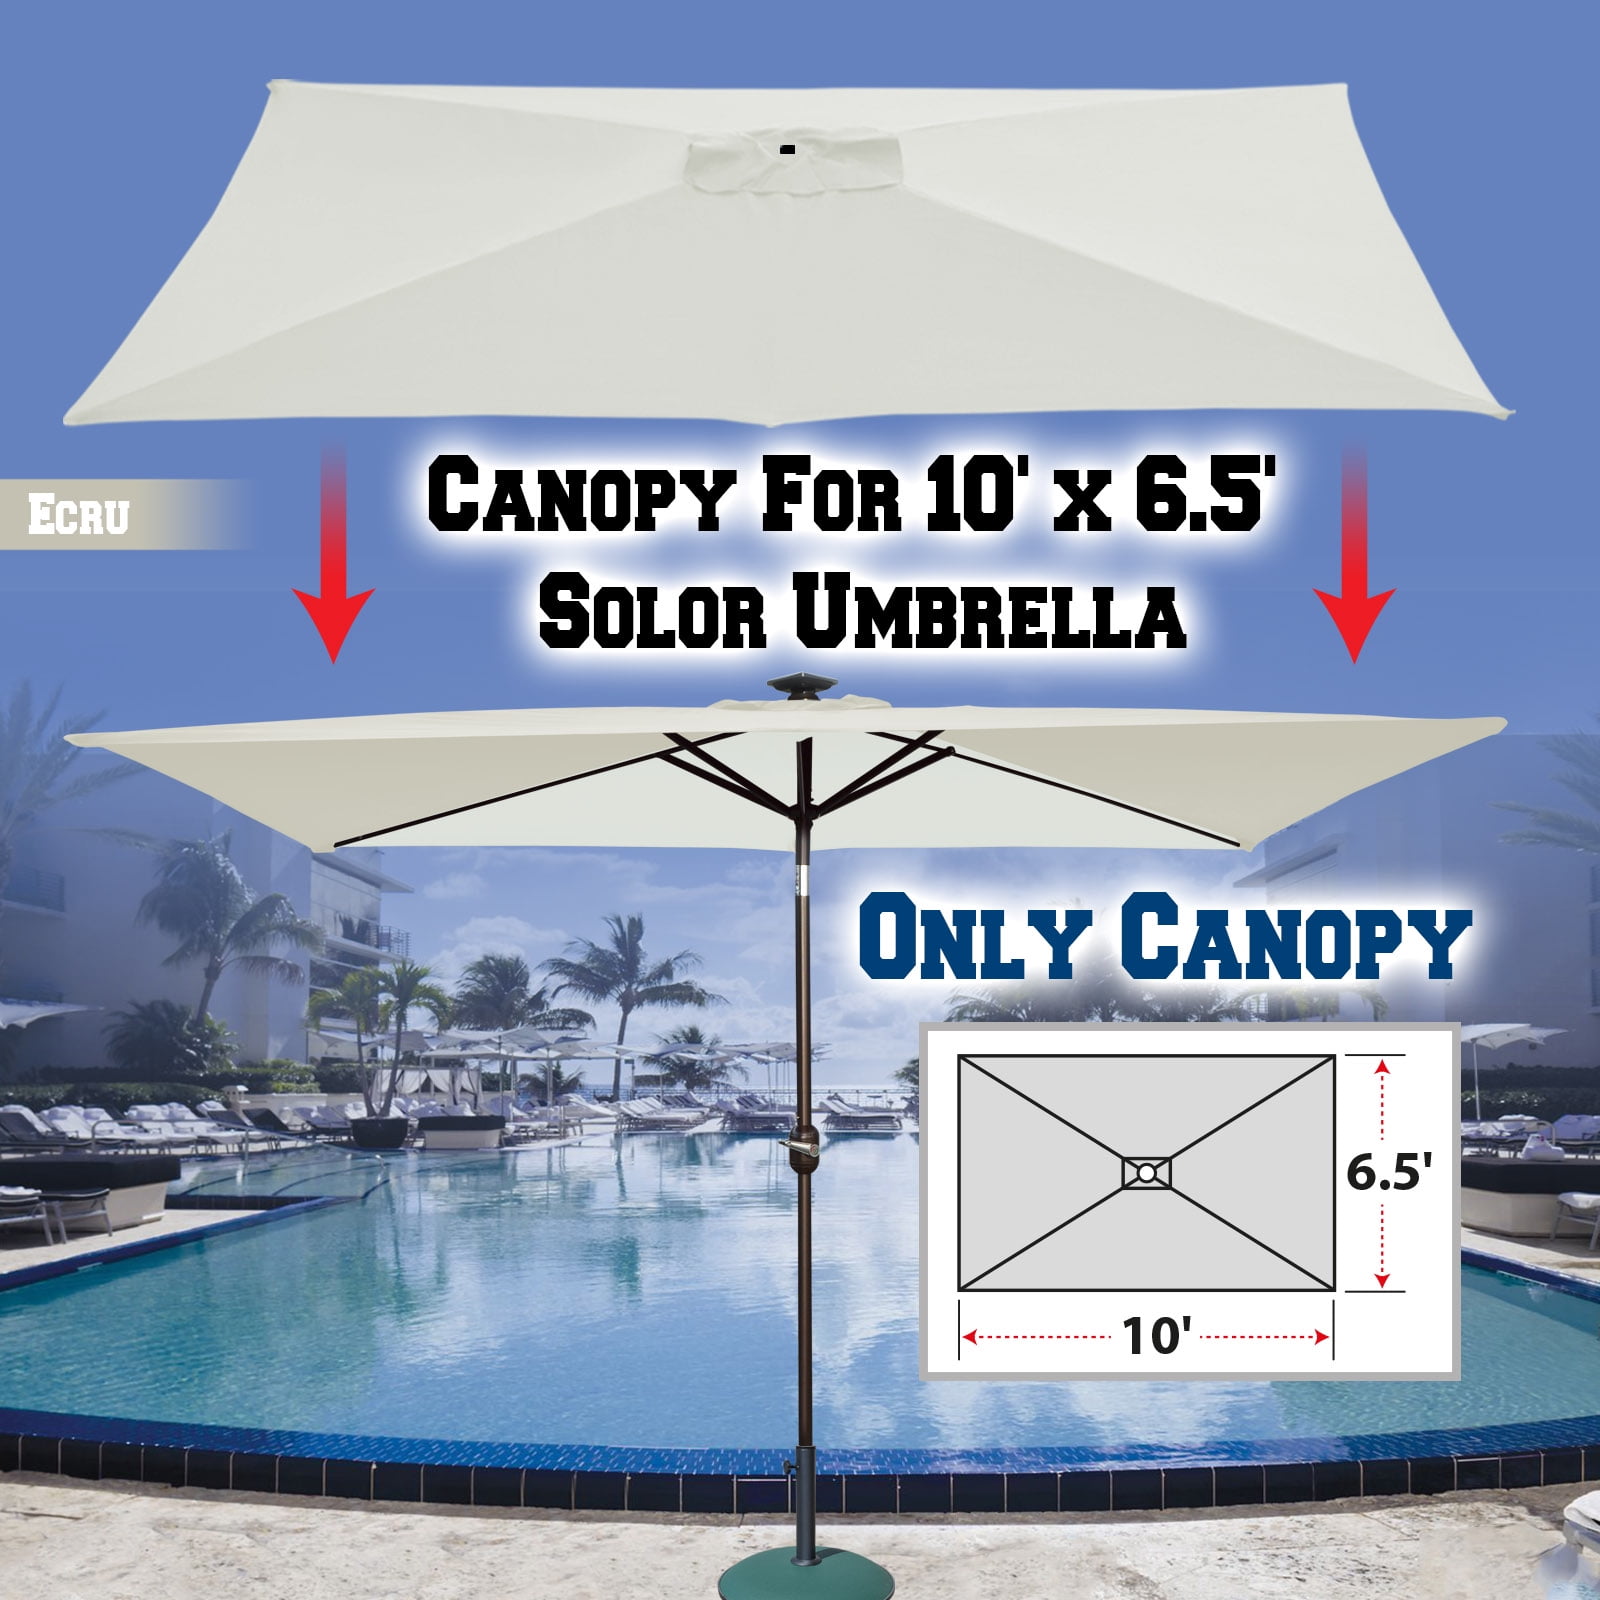 10ft 6 Rib Patio Umbrella Cover Canopy Replacement Parasol Top Cover Outdoor 